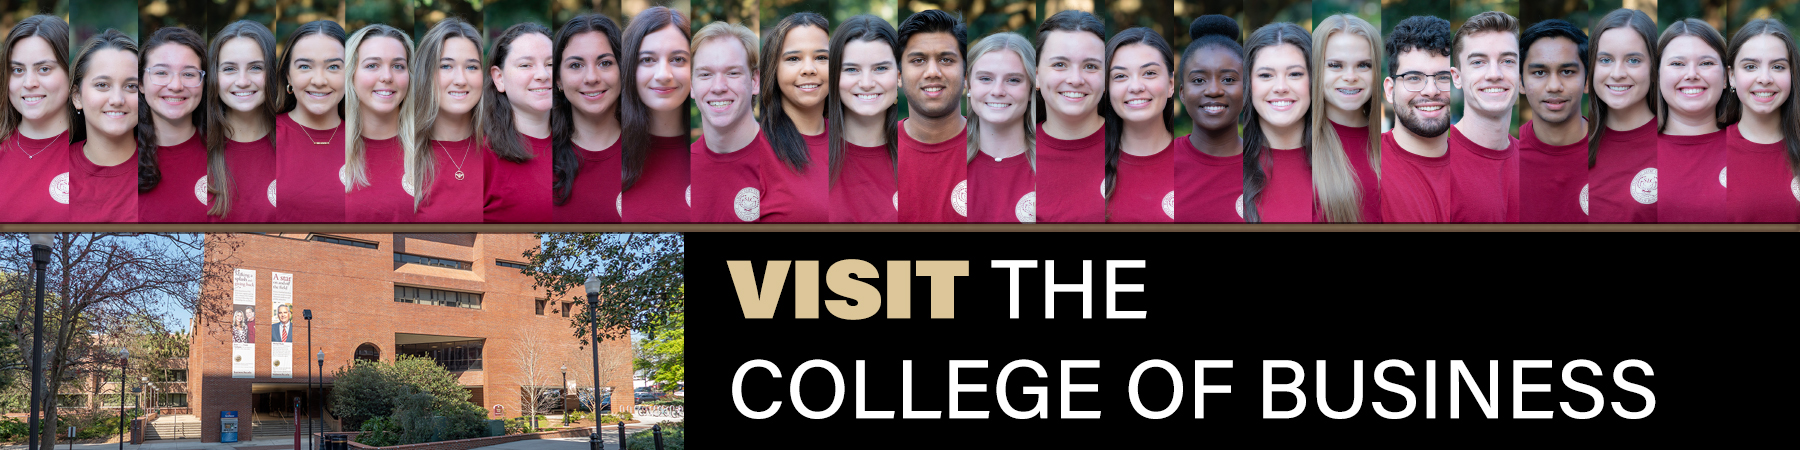 Visit the College of Business